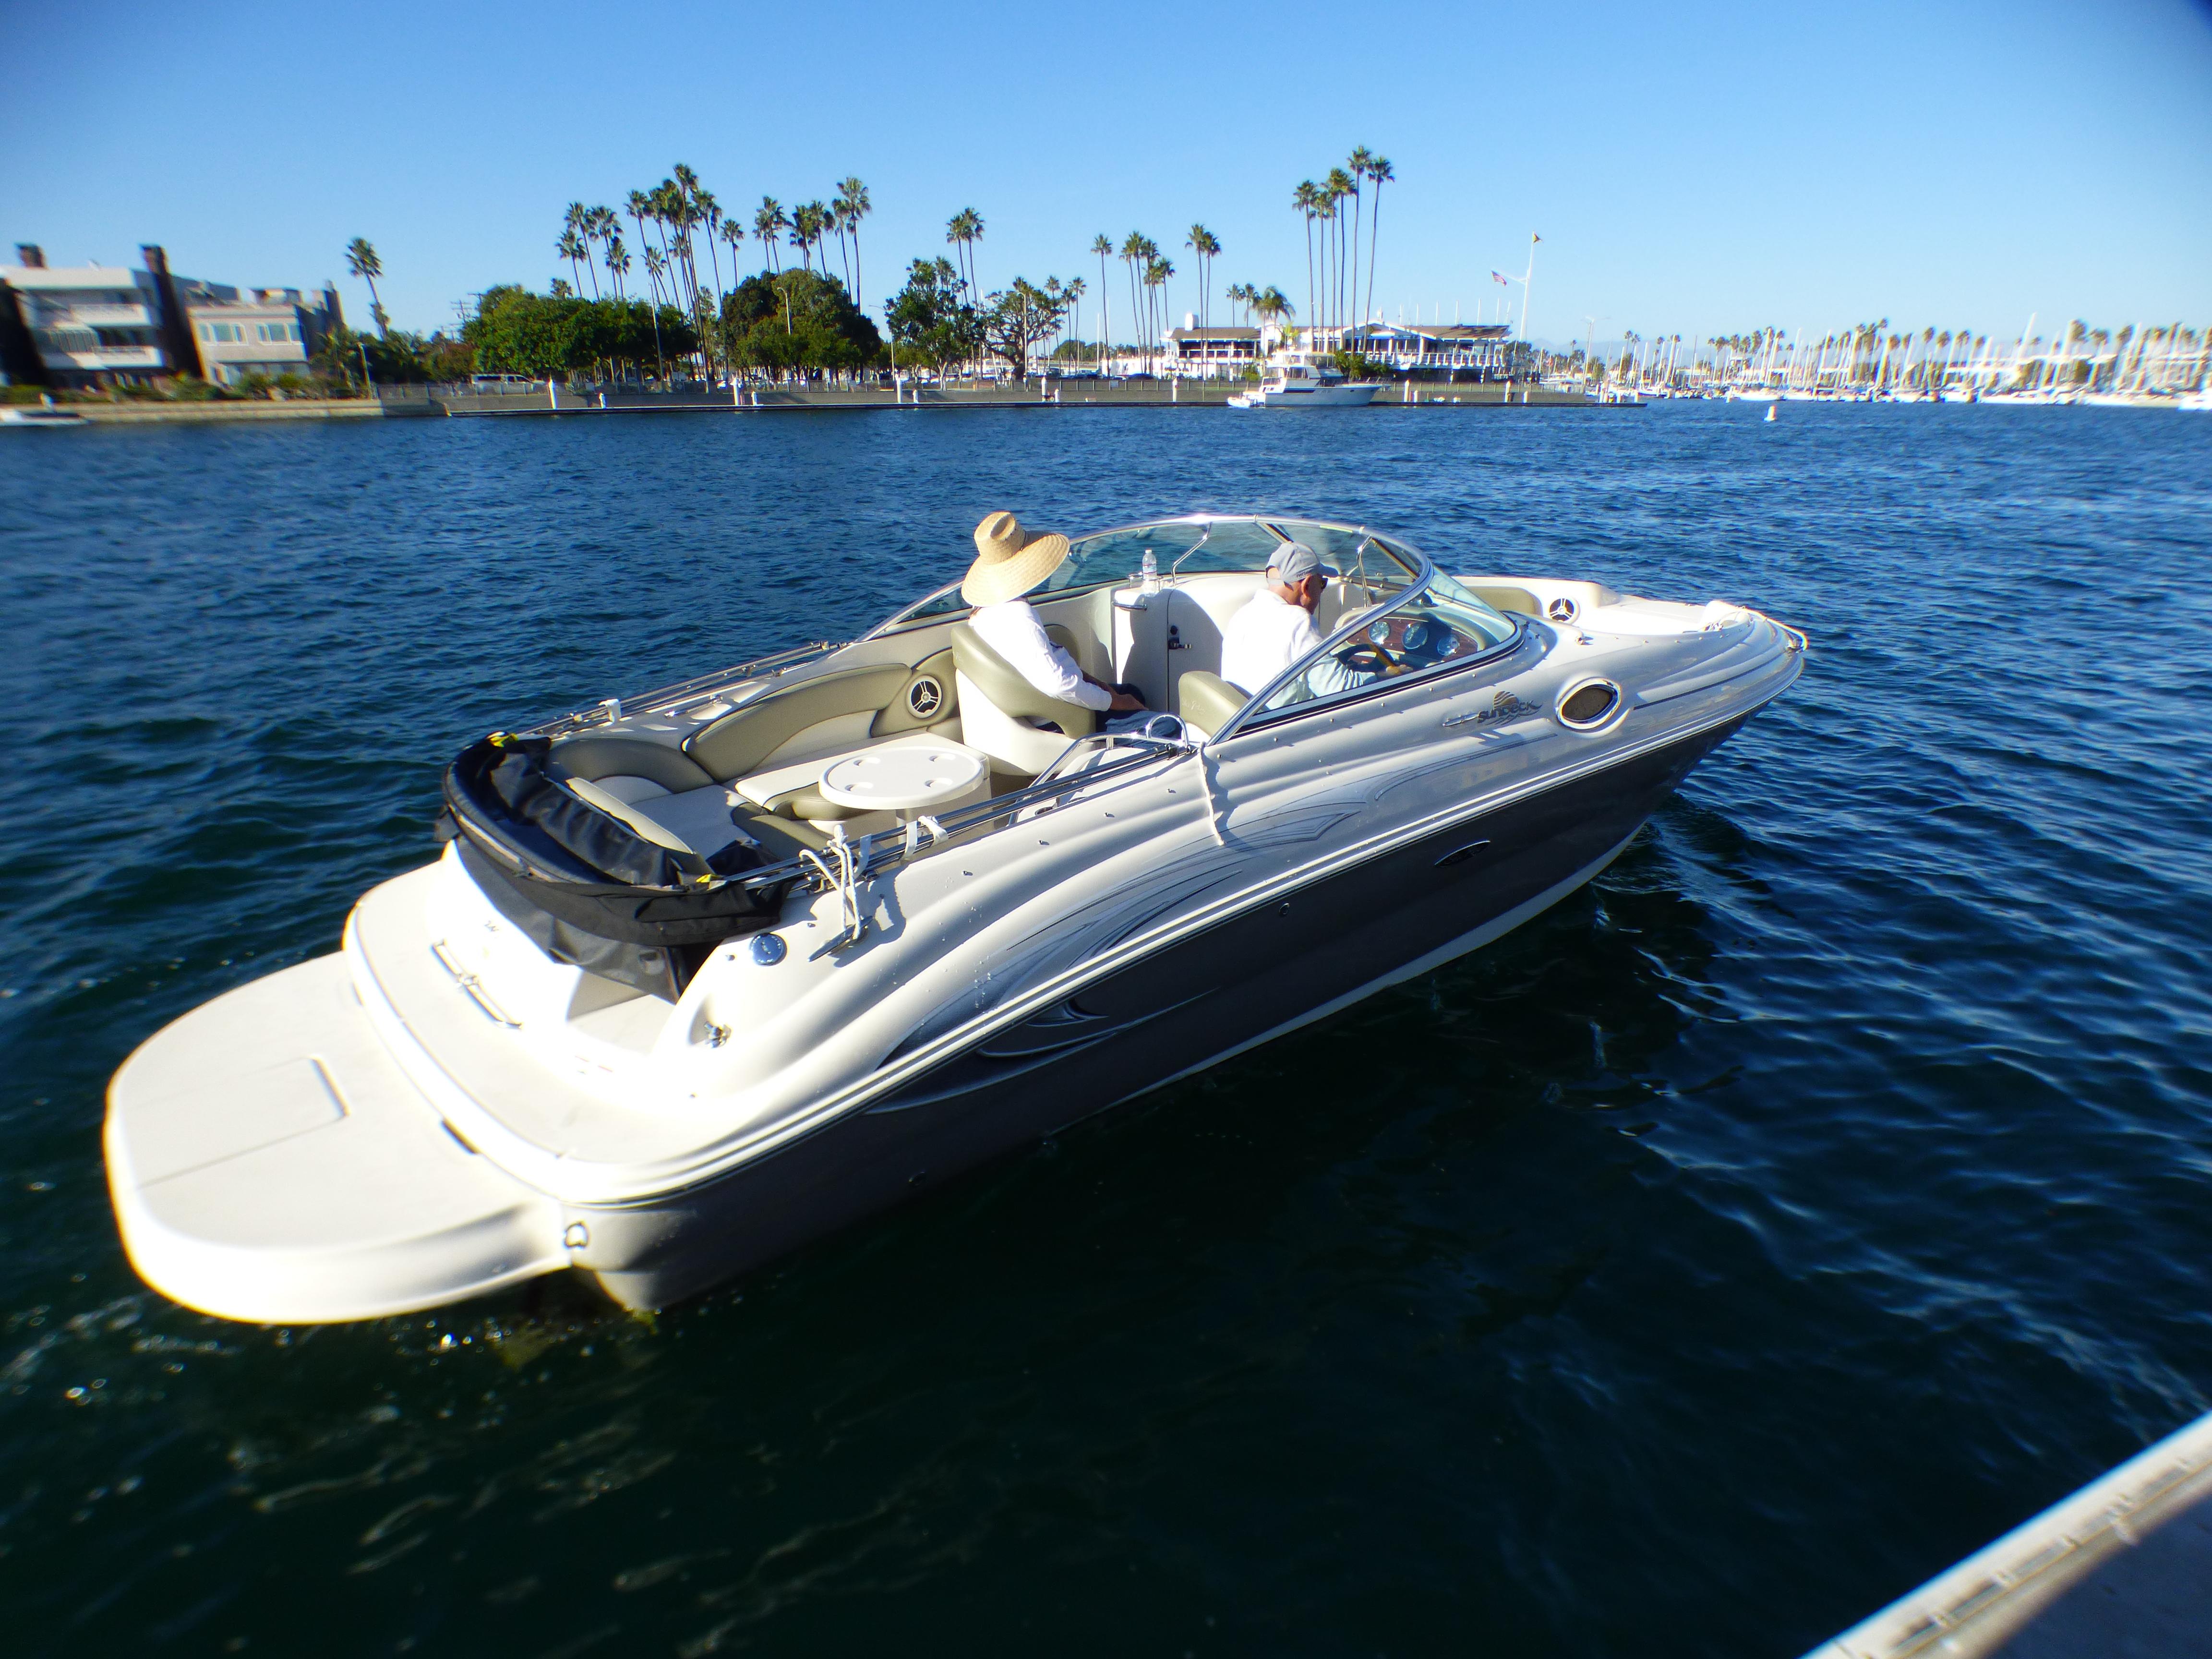 2006 Sea Ray 240 Sundeck Runabout for sale - YachtWorld